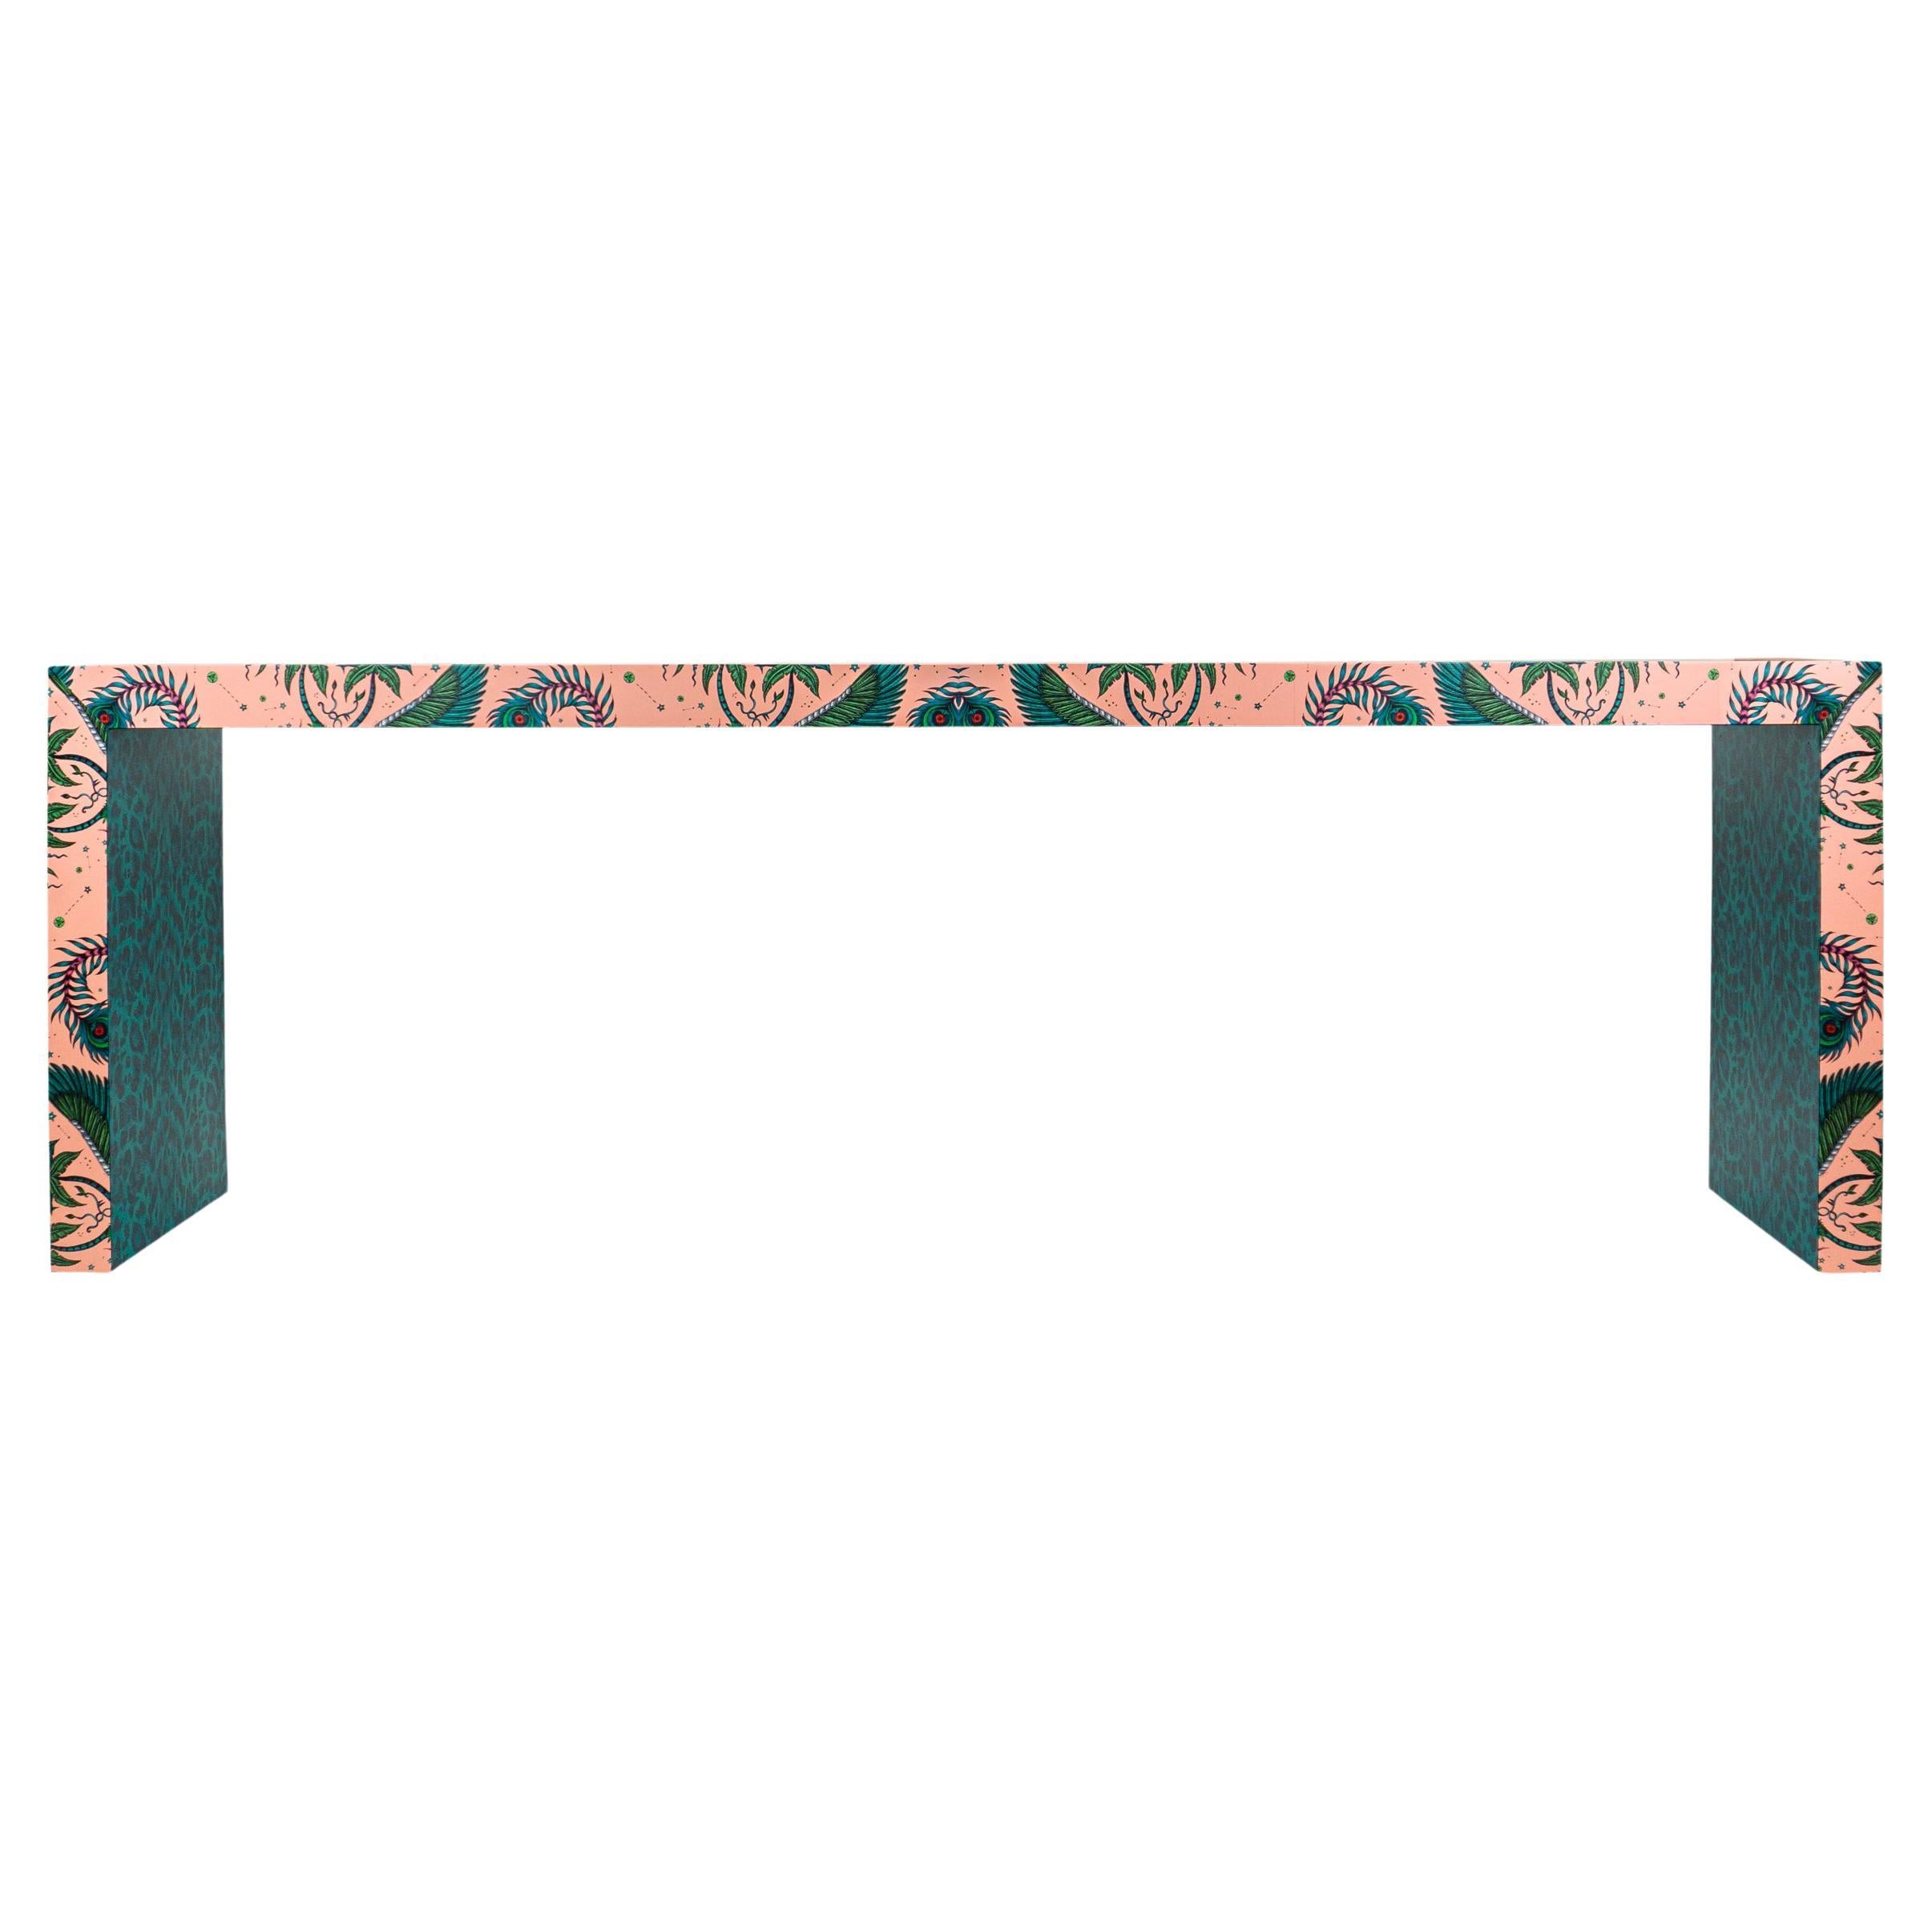 Fantastical Pale Pink Lynx Waterfall Console Table w Emerald Leopard Belly